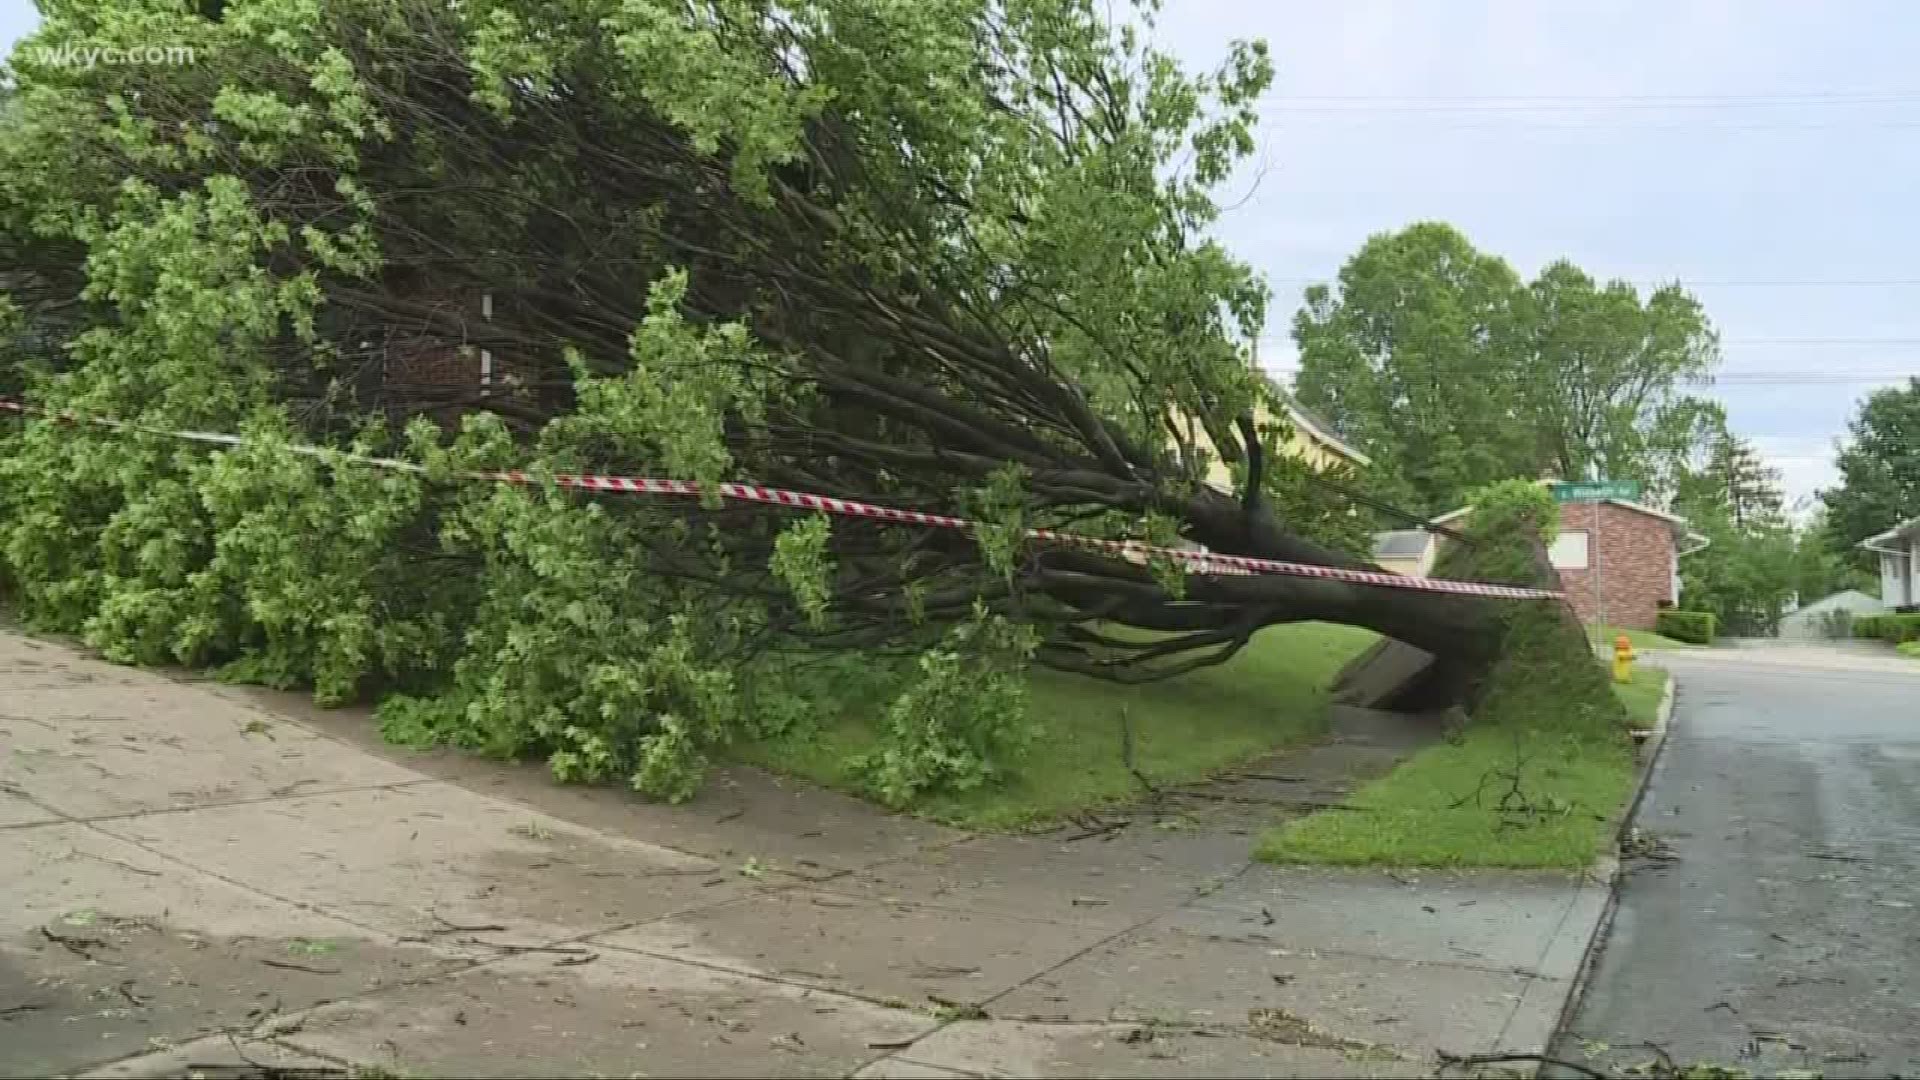 The storms downed power lines and uprooted trees, even through concrete.